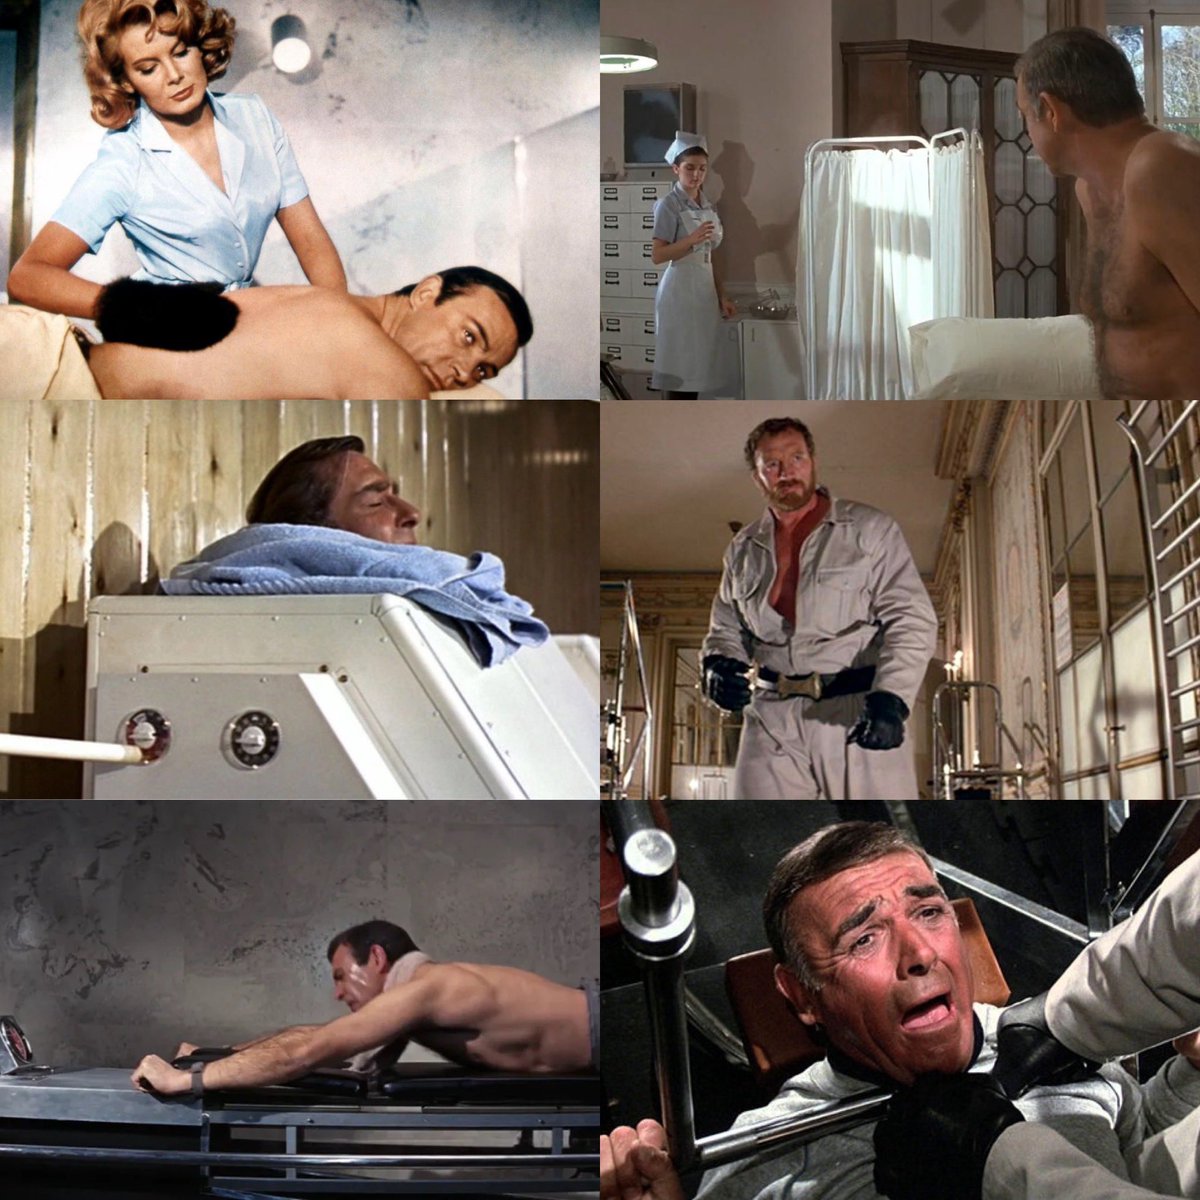 Here’s a question, both #JamesBond films THUNDERBALL and NEVER SAY NEVER AGAIN feature 007 taking a trip to Shrublands health farm, but the question is, which version would you rather be stay at?

I vote for THUNDERBALL, just to mess with Count Lippe!

pod.fo/e/130a8b